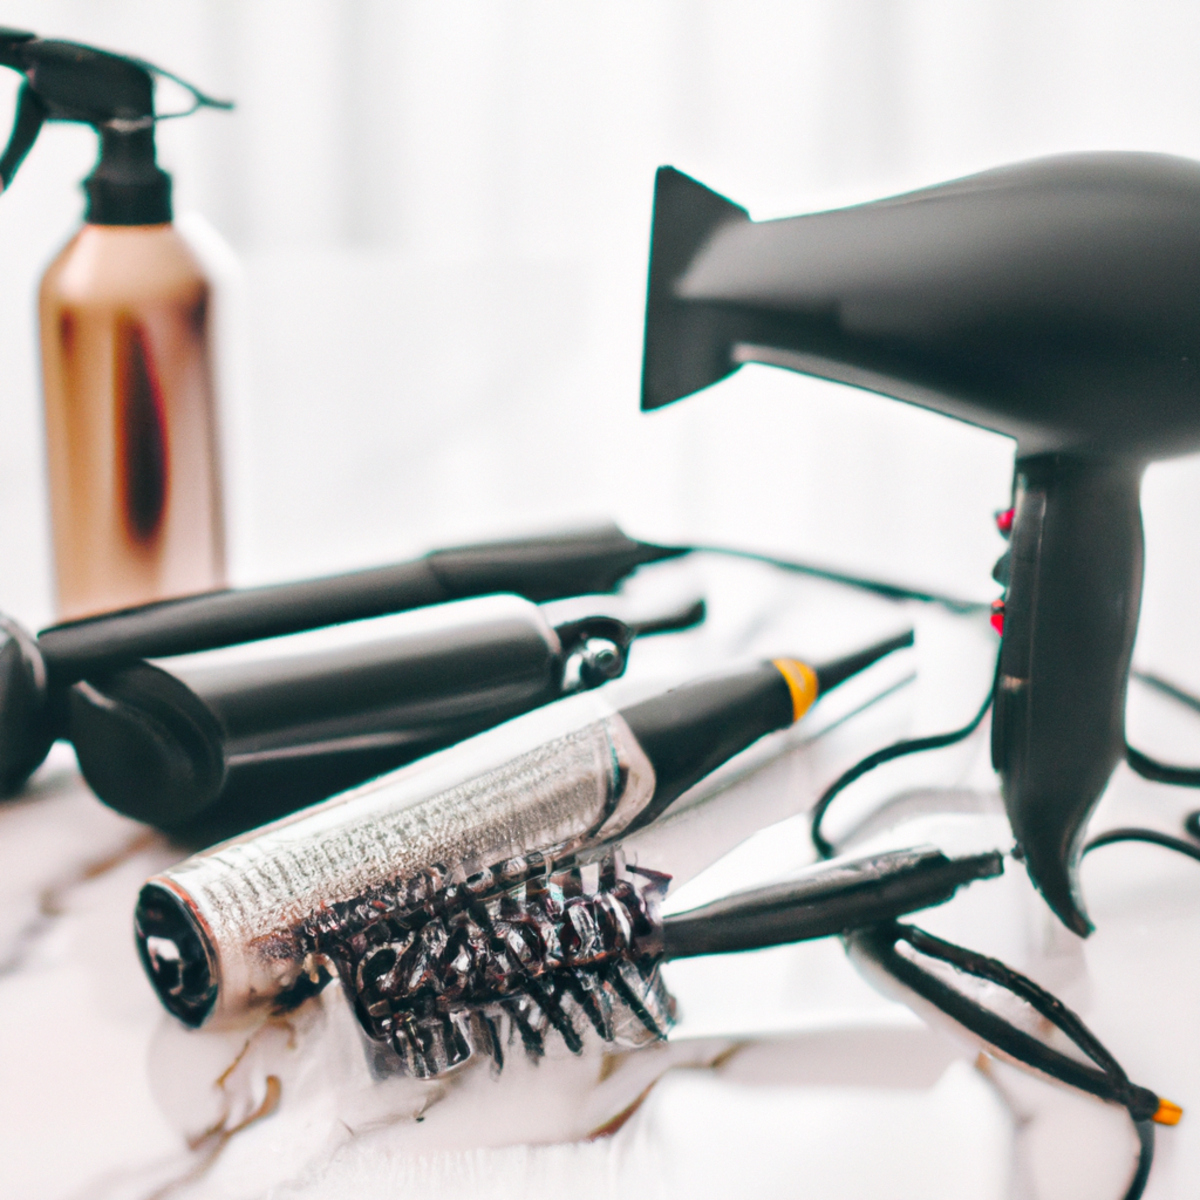 Trending hairstyles for 2023 - Hair styling tools and products arranged neatly on a white marble countertop, suggesting a professional stylist's work.